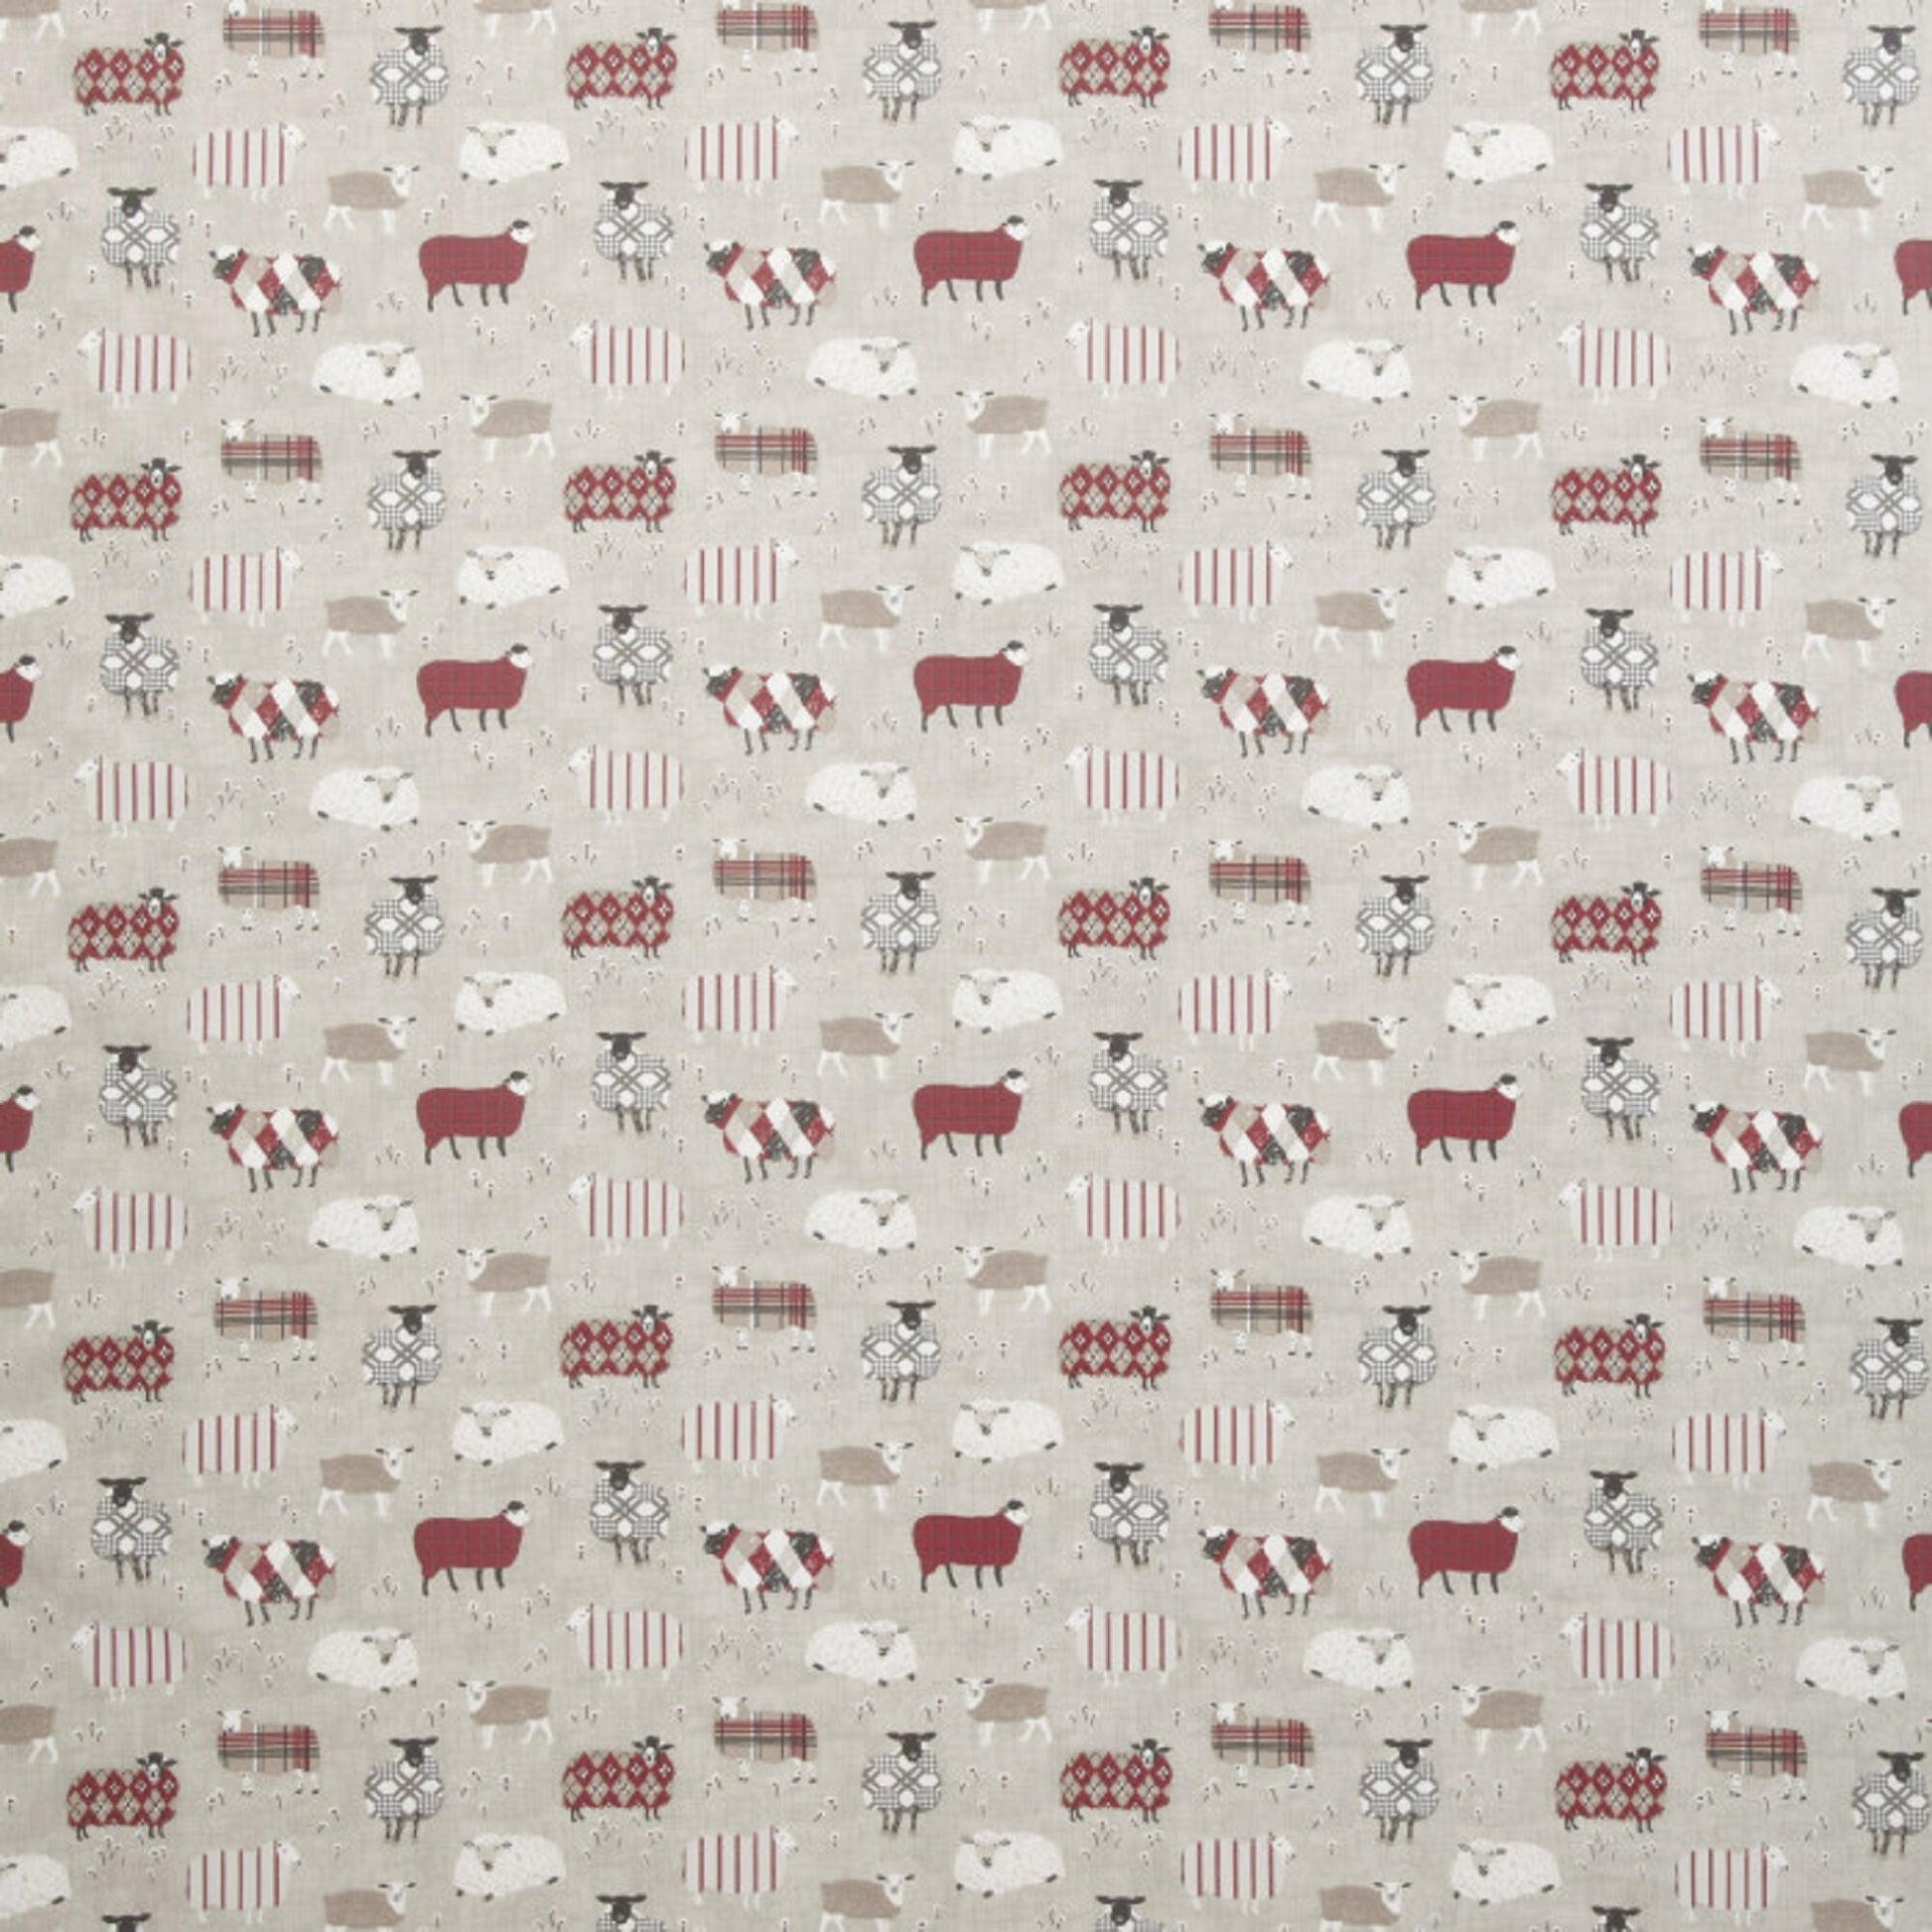 Red and Taupe Sheep in Jumpers Fabric by the half Metre-100% Cotton British Fabric-Craft Fabric red sheep fabric